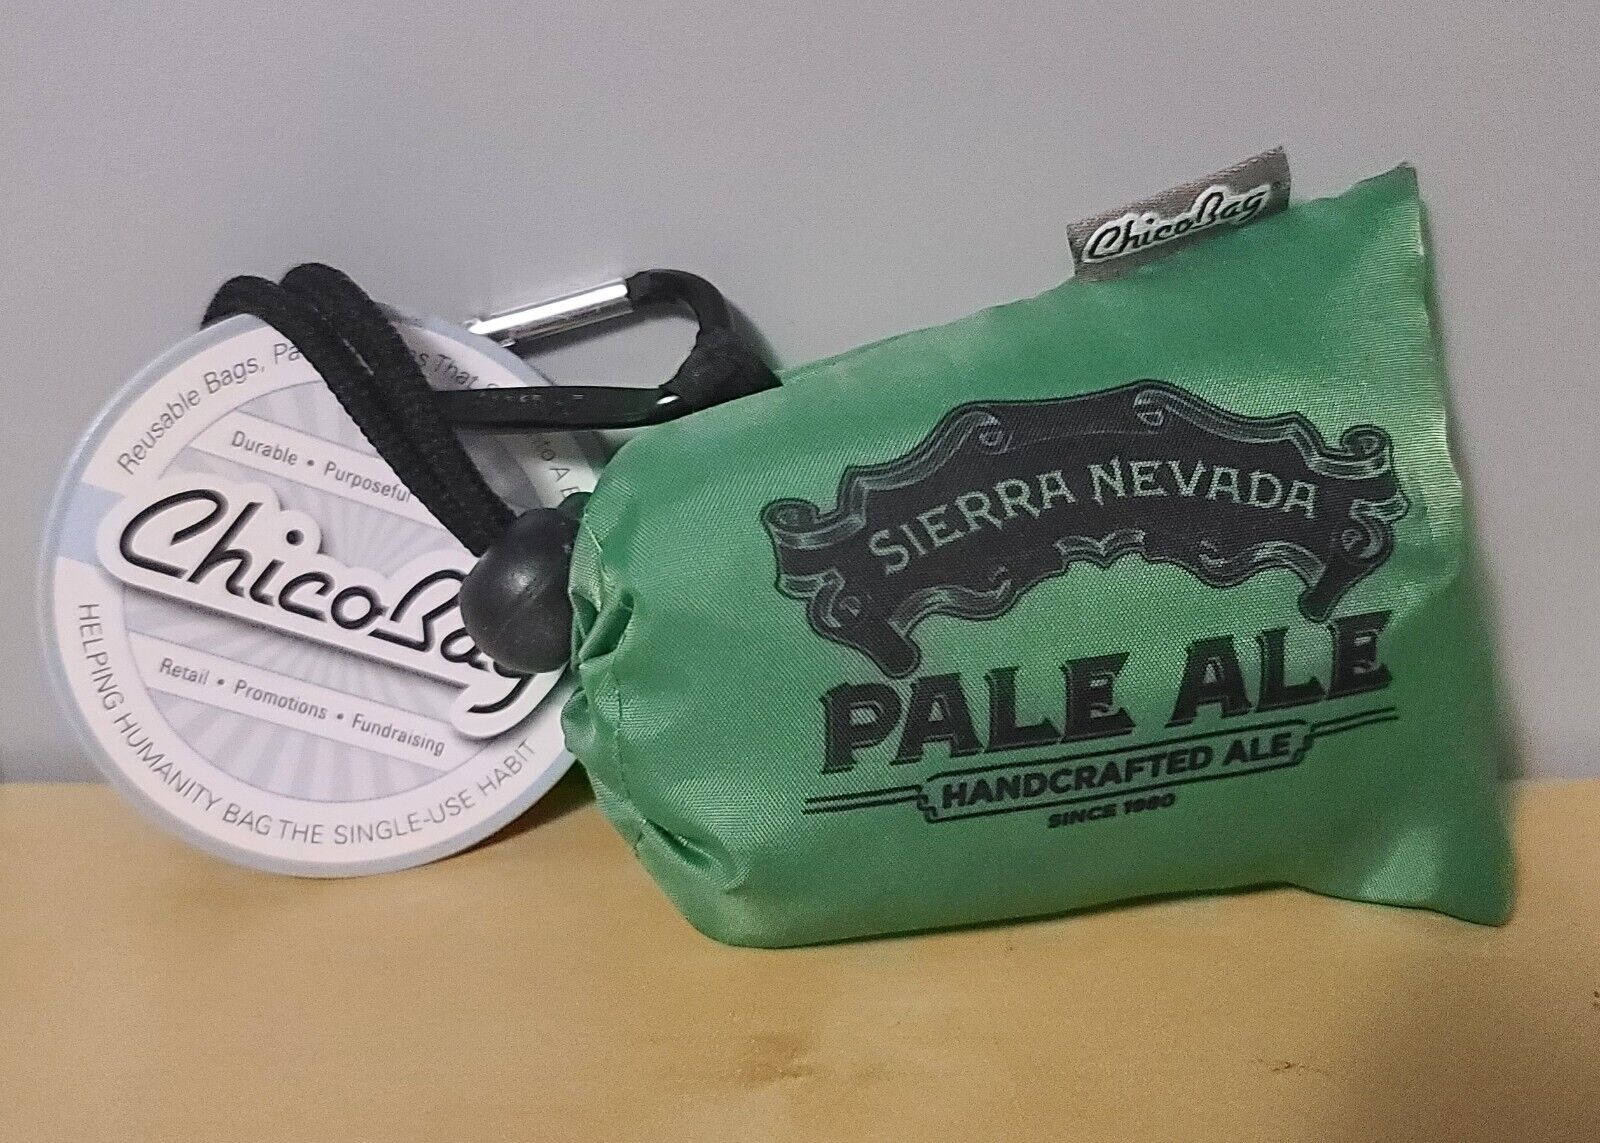 Sierra Nevada Pale Ale Chico Bag Reusable Shopping Compact Tote with Carabineer Без бренда